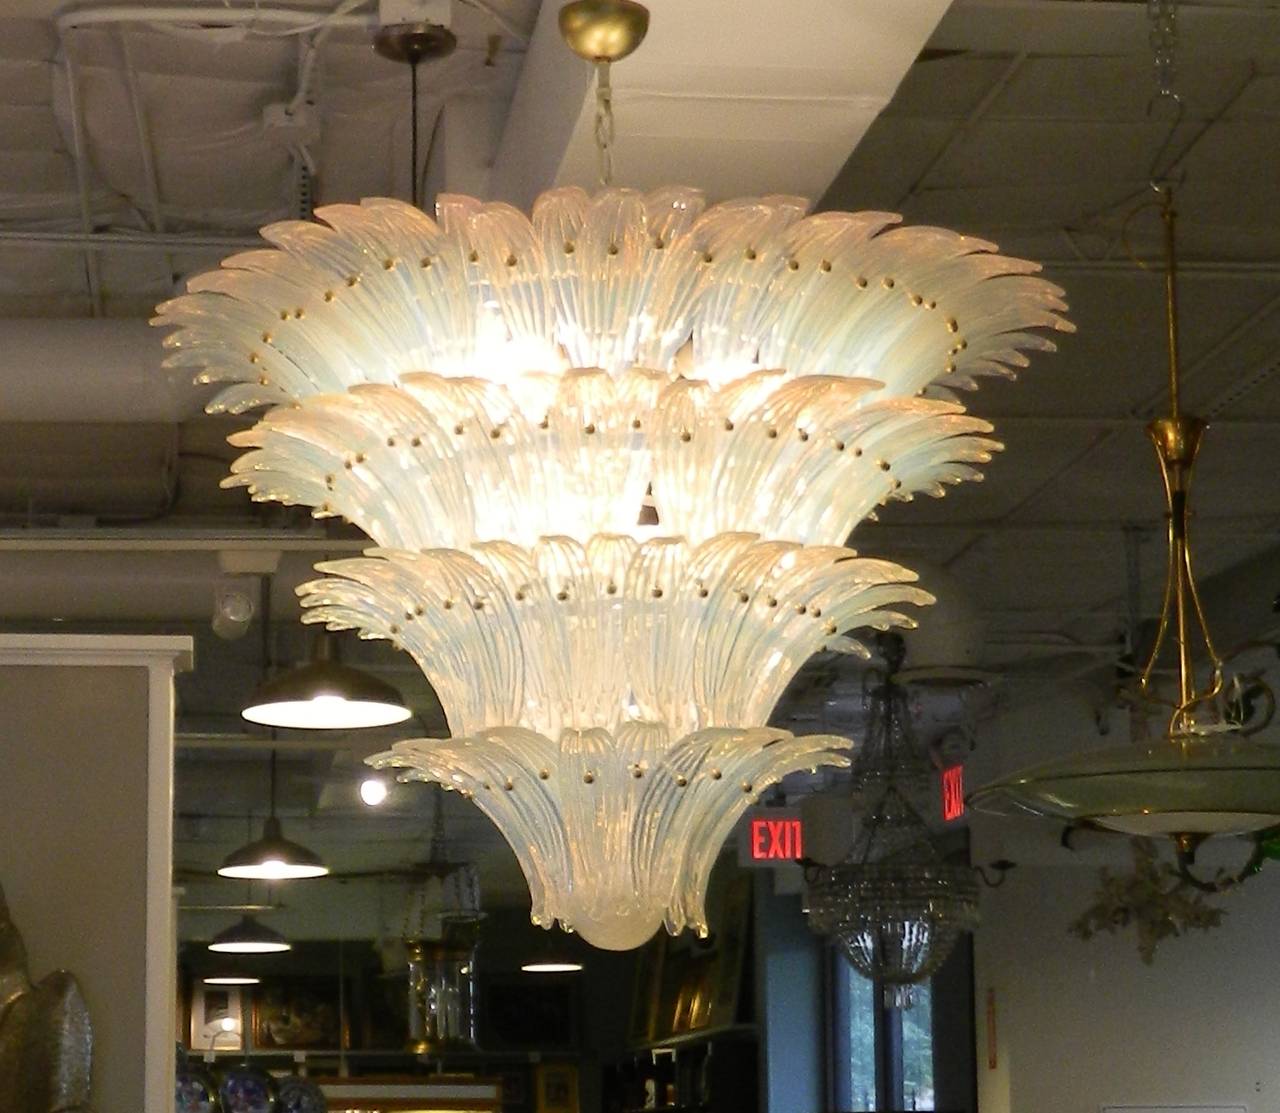 Large opaline glass chandelier attributed to Barovier and Toso titled palmette. Made in Italy, 1960s. There are four-tiers of layered opaline glass palm leaves and a textured ball base. It is four-light with a white metal frame.